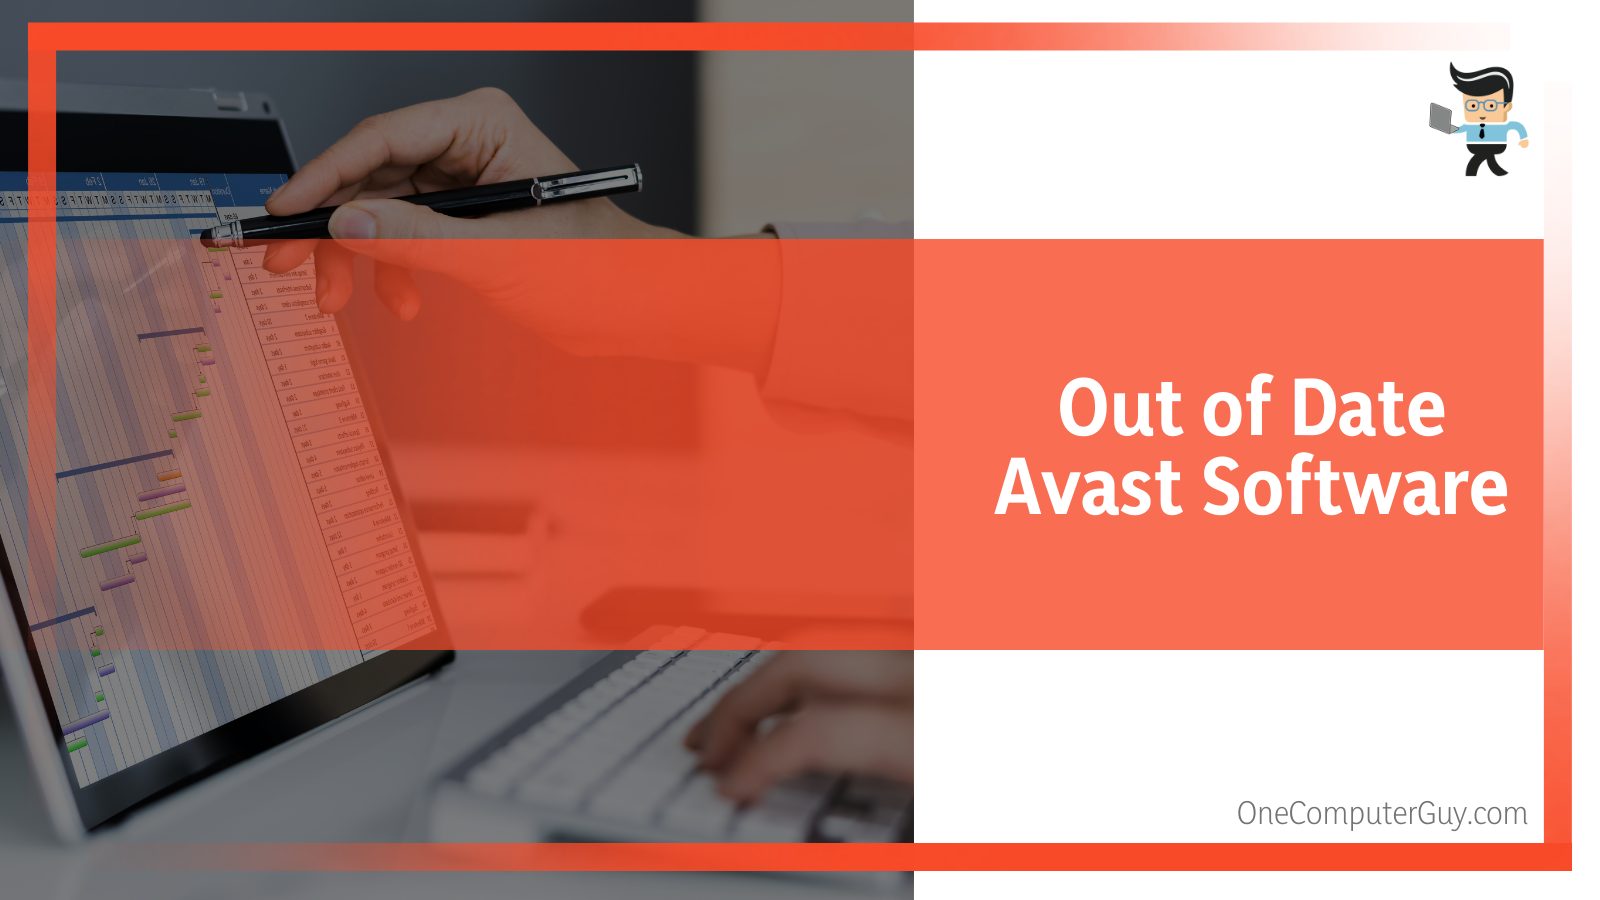 Out of Date Avast Software